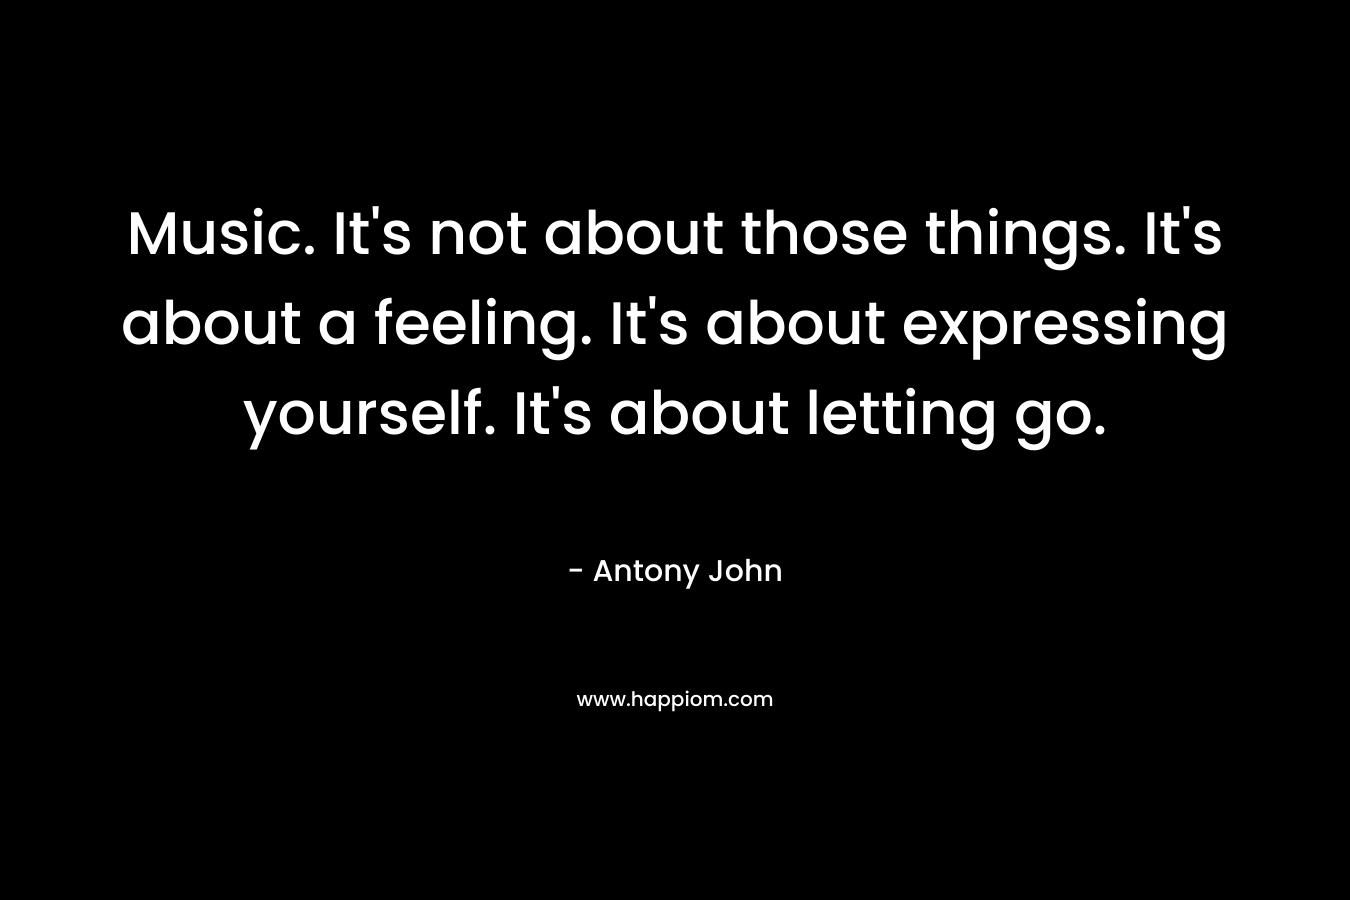 Music. It's not about those things. It's about a feeling. It's about expressing yourself. It's about letting go.